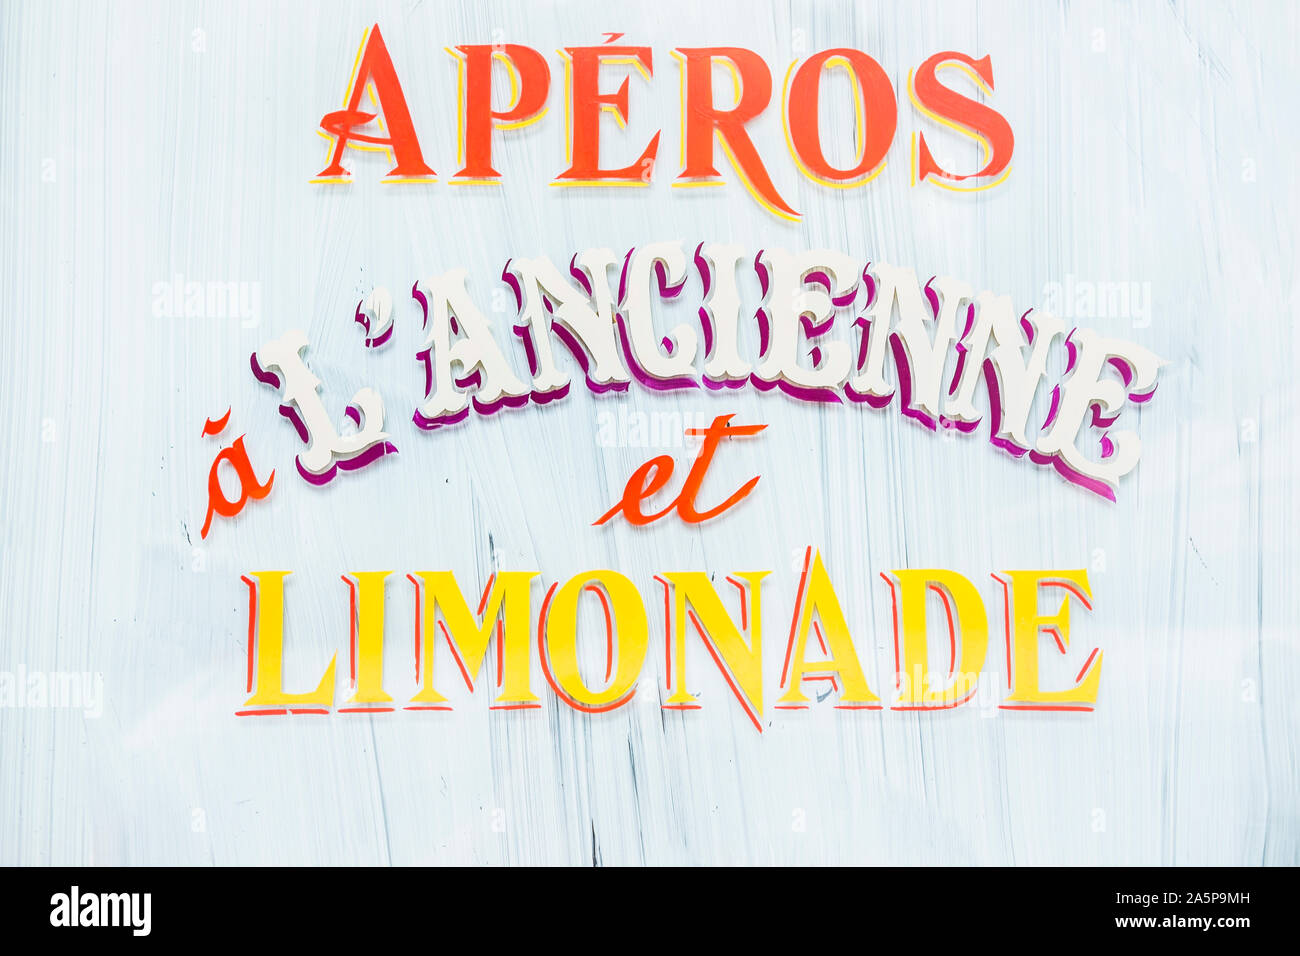 aperos a l´ ancienne et limonade, old school lettering on white glass paint Stock Photo